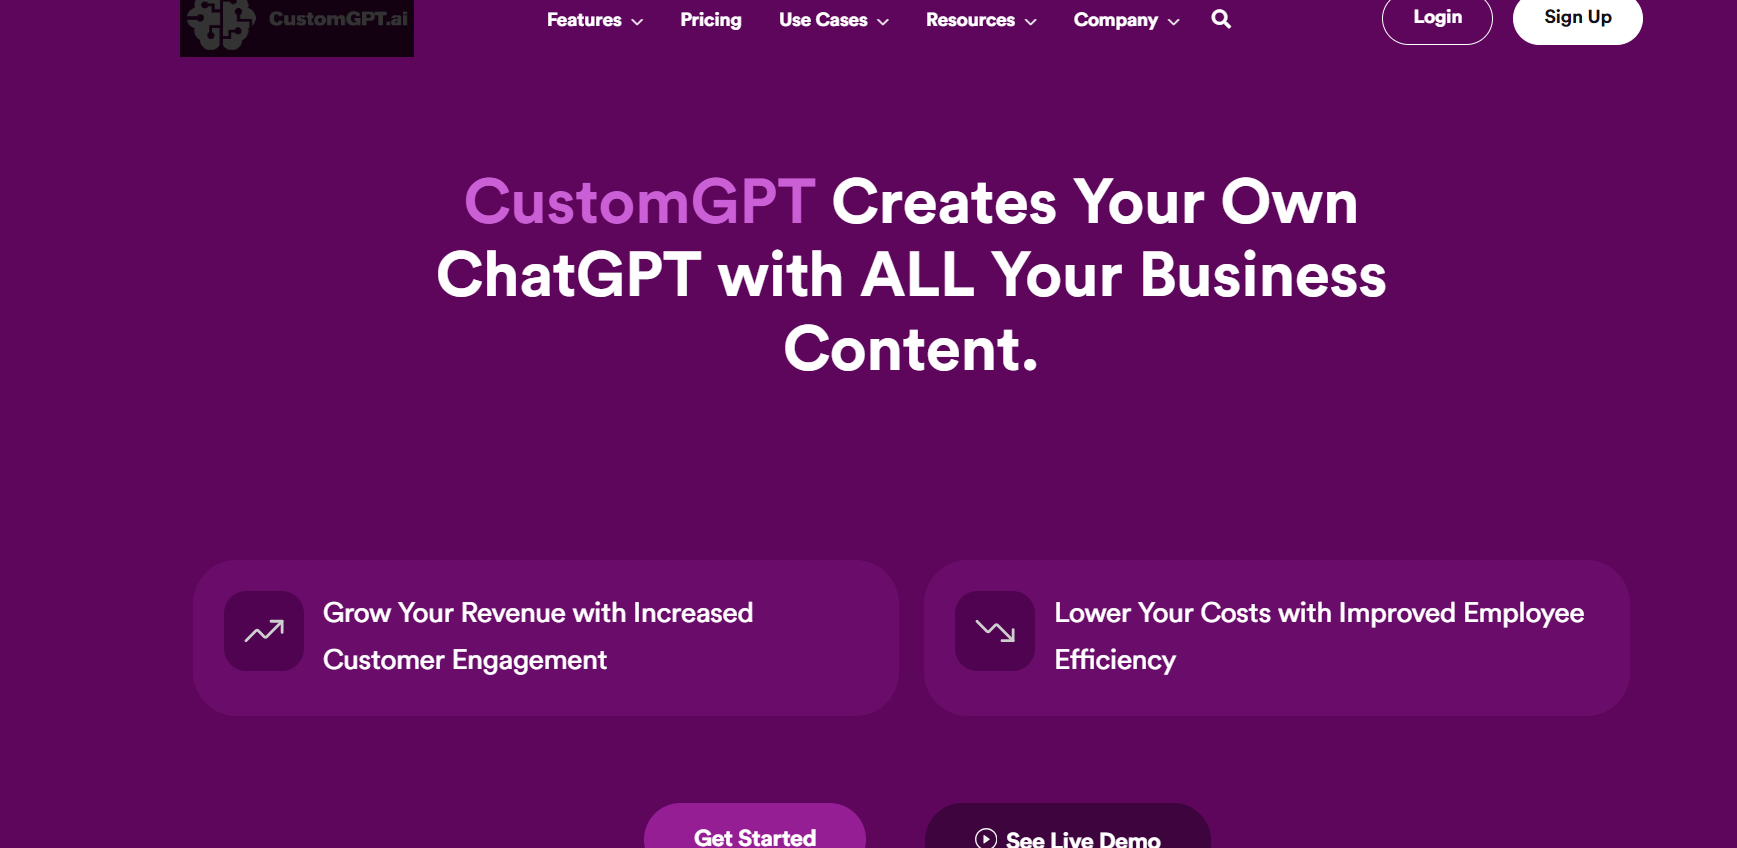 Custom GPT: A Platform for Personalized Text Generation